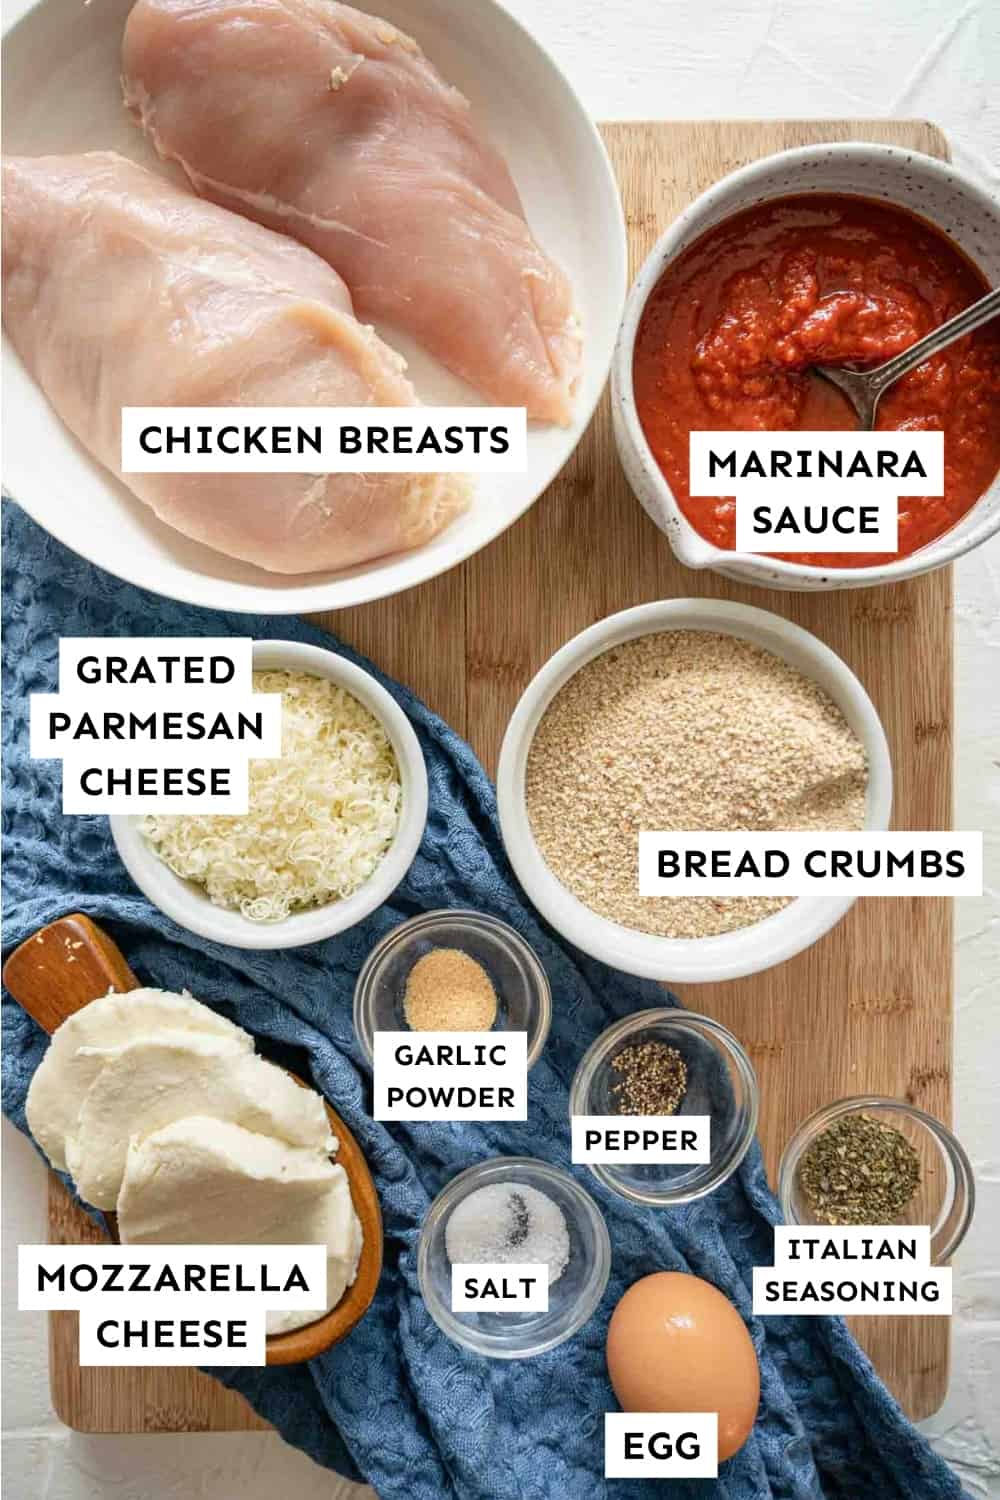 Ingredients laid out and labeled for Baked Chicken Parmesan.